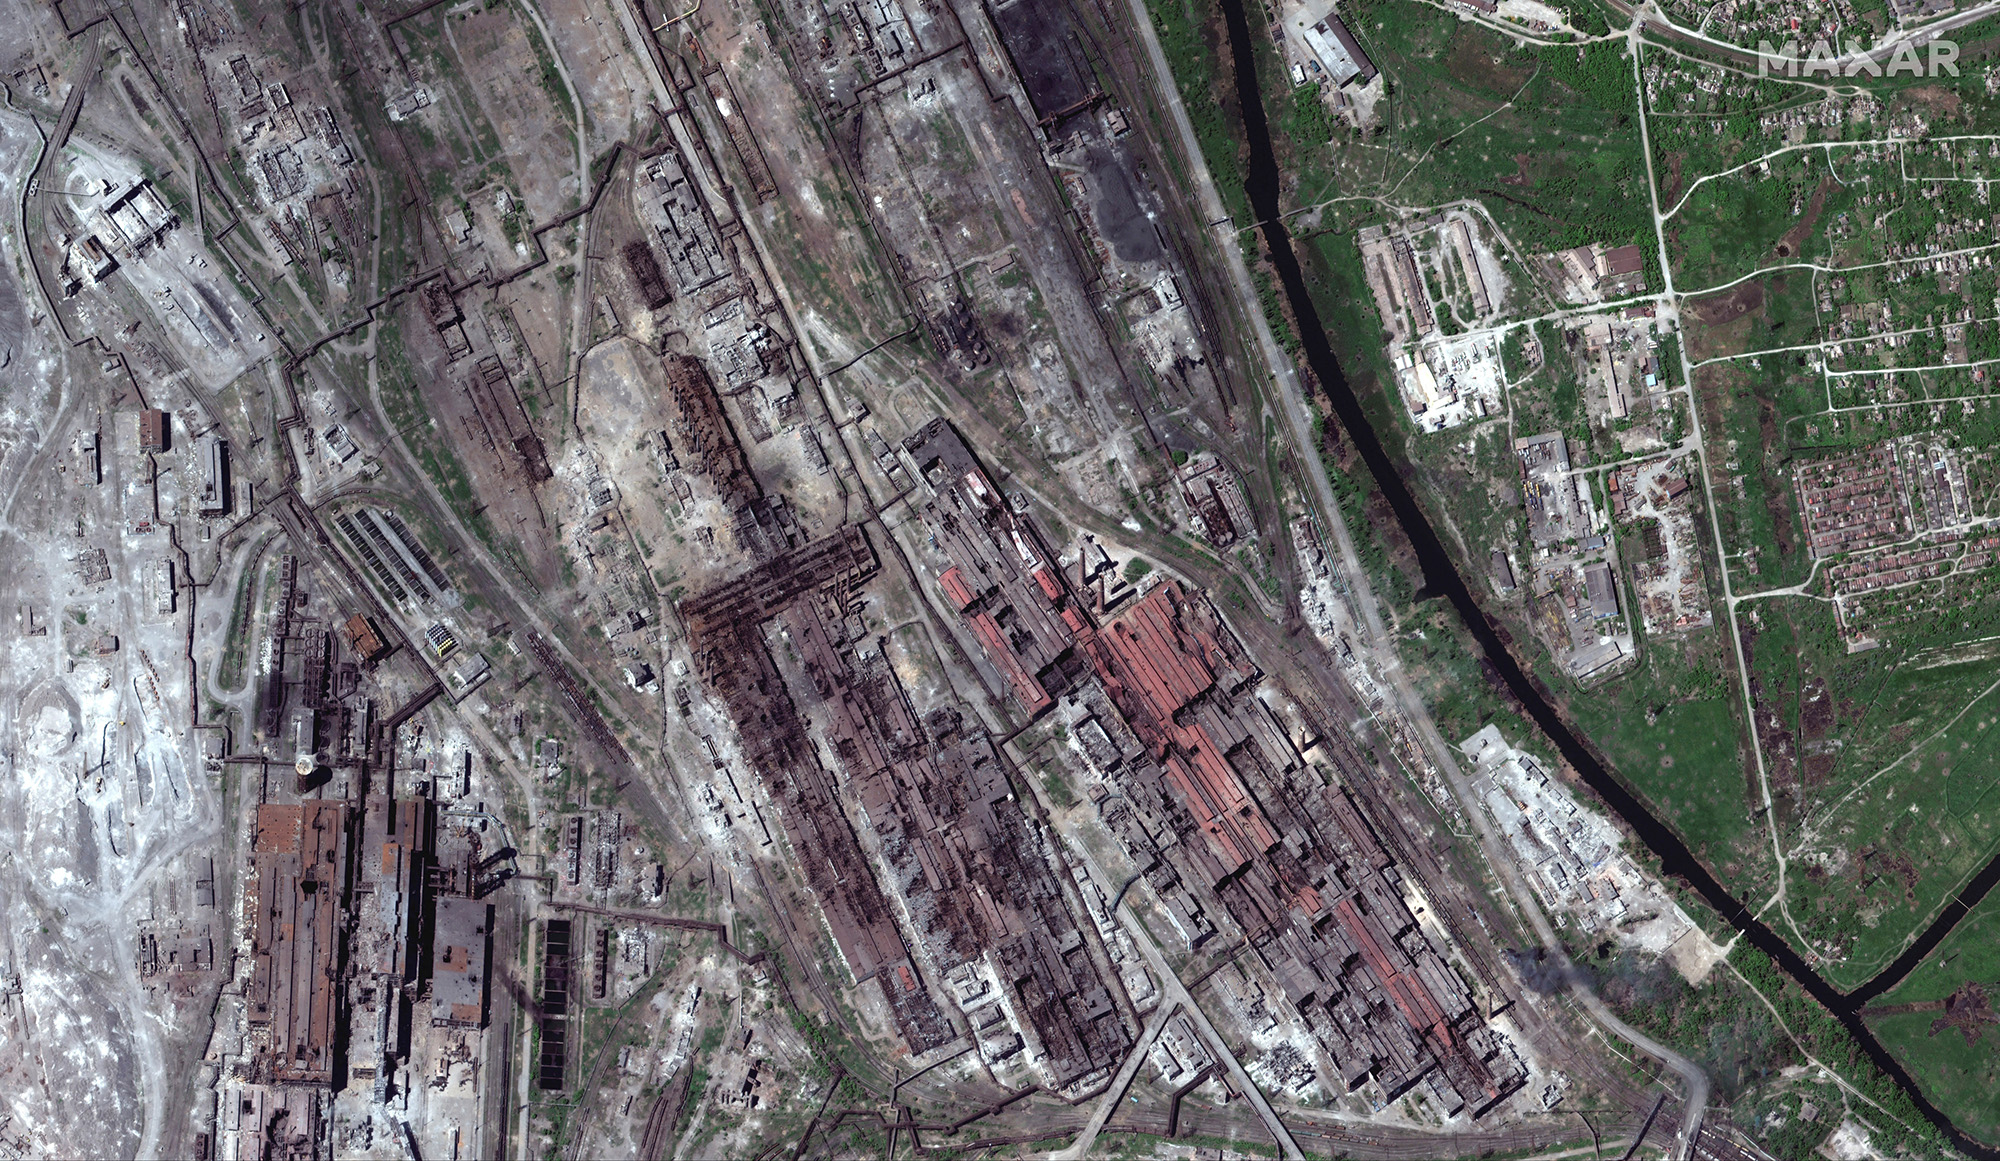 An overview of the Azovstal steel plant in Mariupol, Ukraine, on May 12.